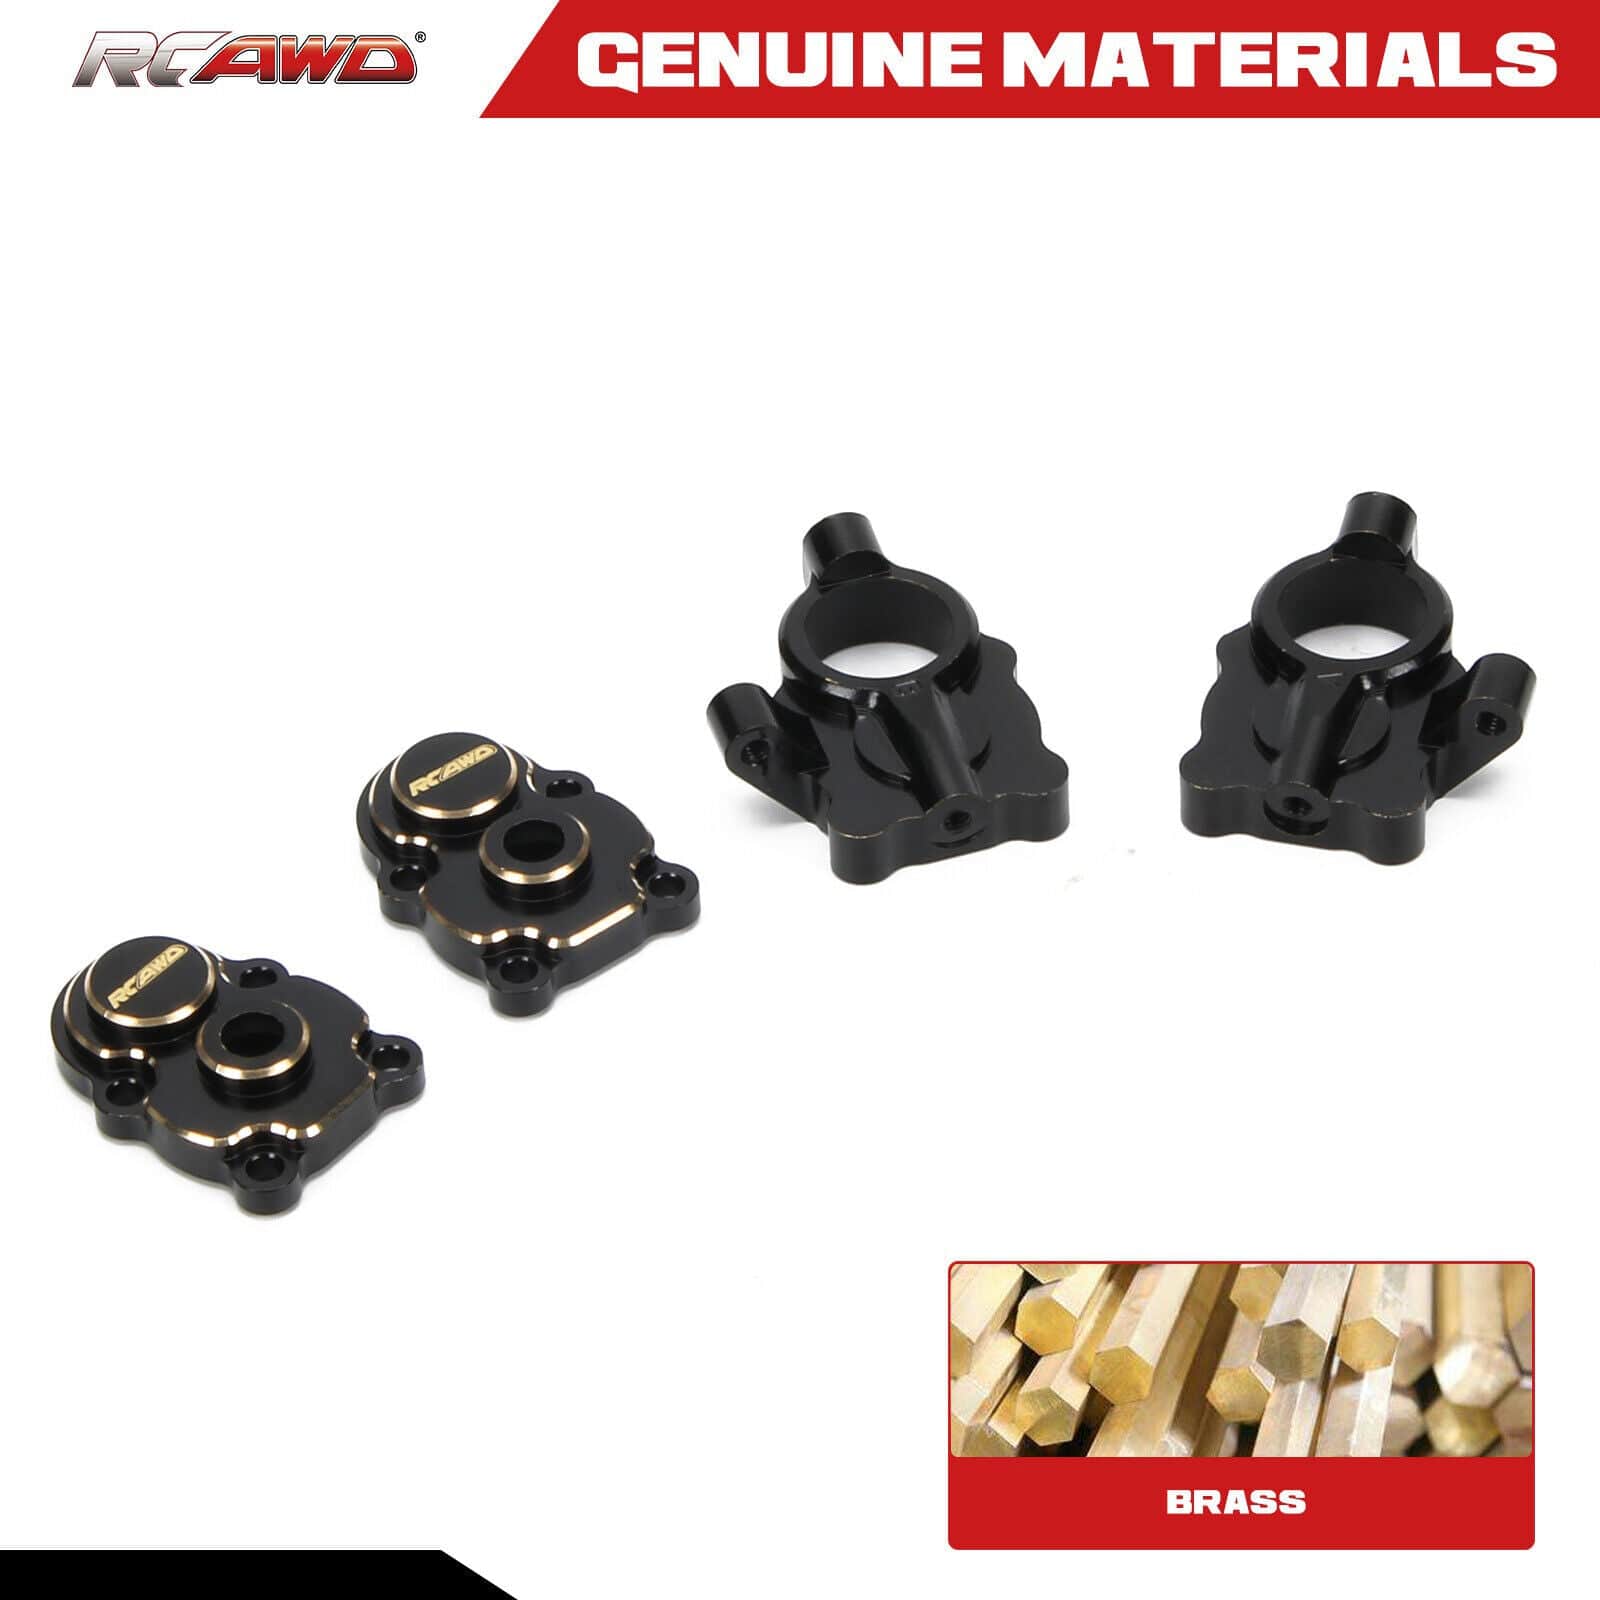 RCAWD Front Brass Portal Housing for 1/24 FMS FCX24 C3017 - RCAWD